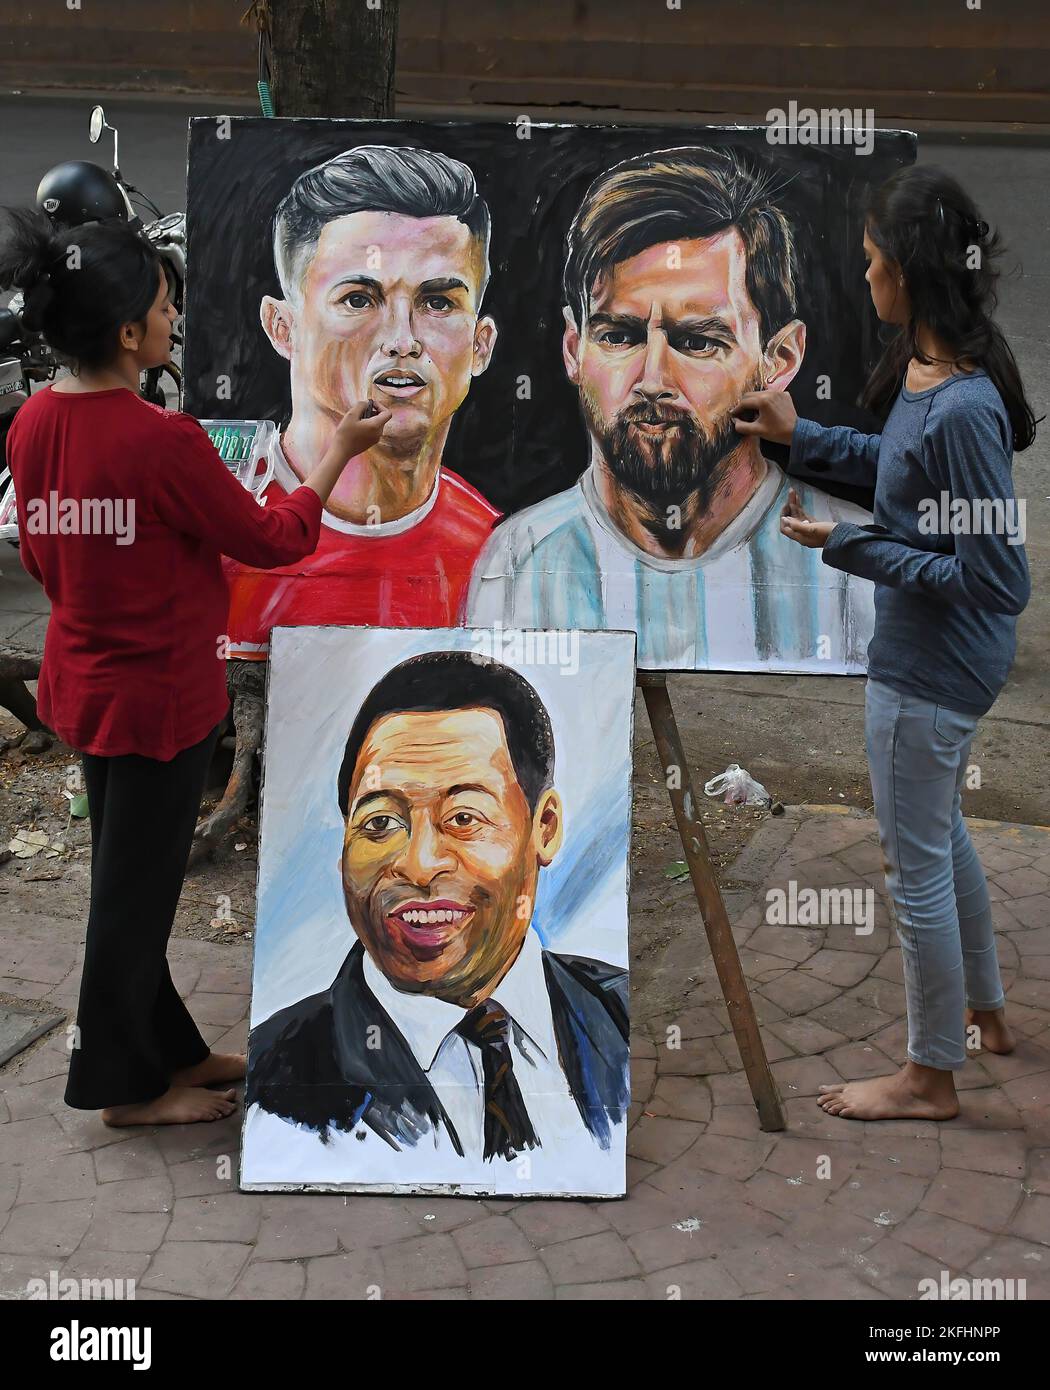 Students from Gurukul school of art paint posters of soccer players Cristiano Ronaldo, Lionel Messi ahead of the FIFA World cup 2022 to be held in Qatar. FIFA World cup will be held from 20th November till18th December 2022 in Qatar. Stock Photo